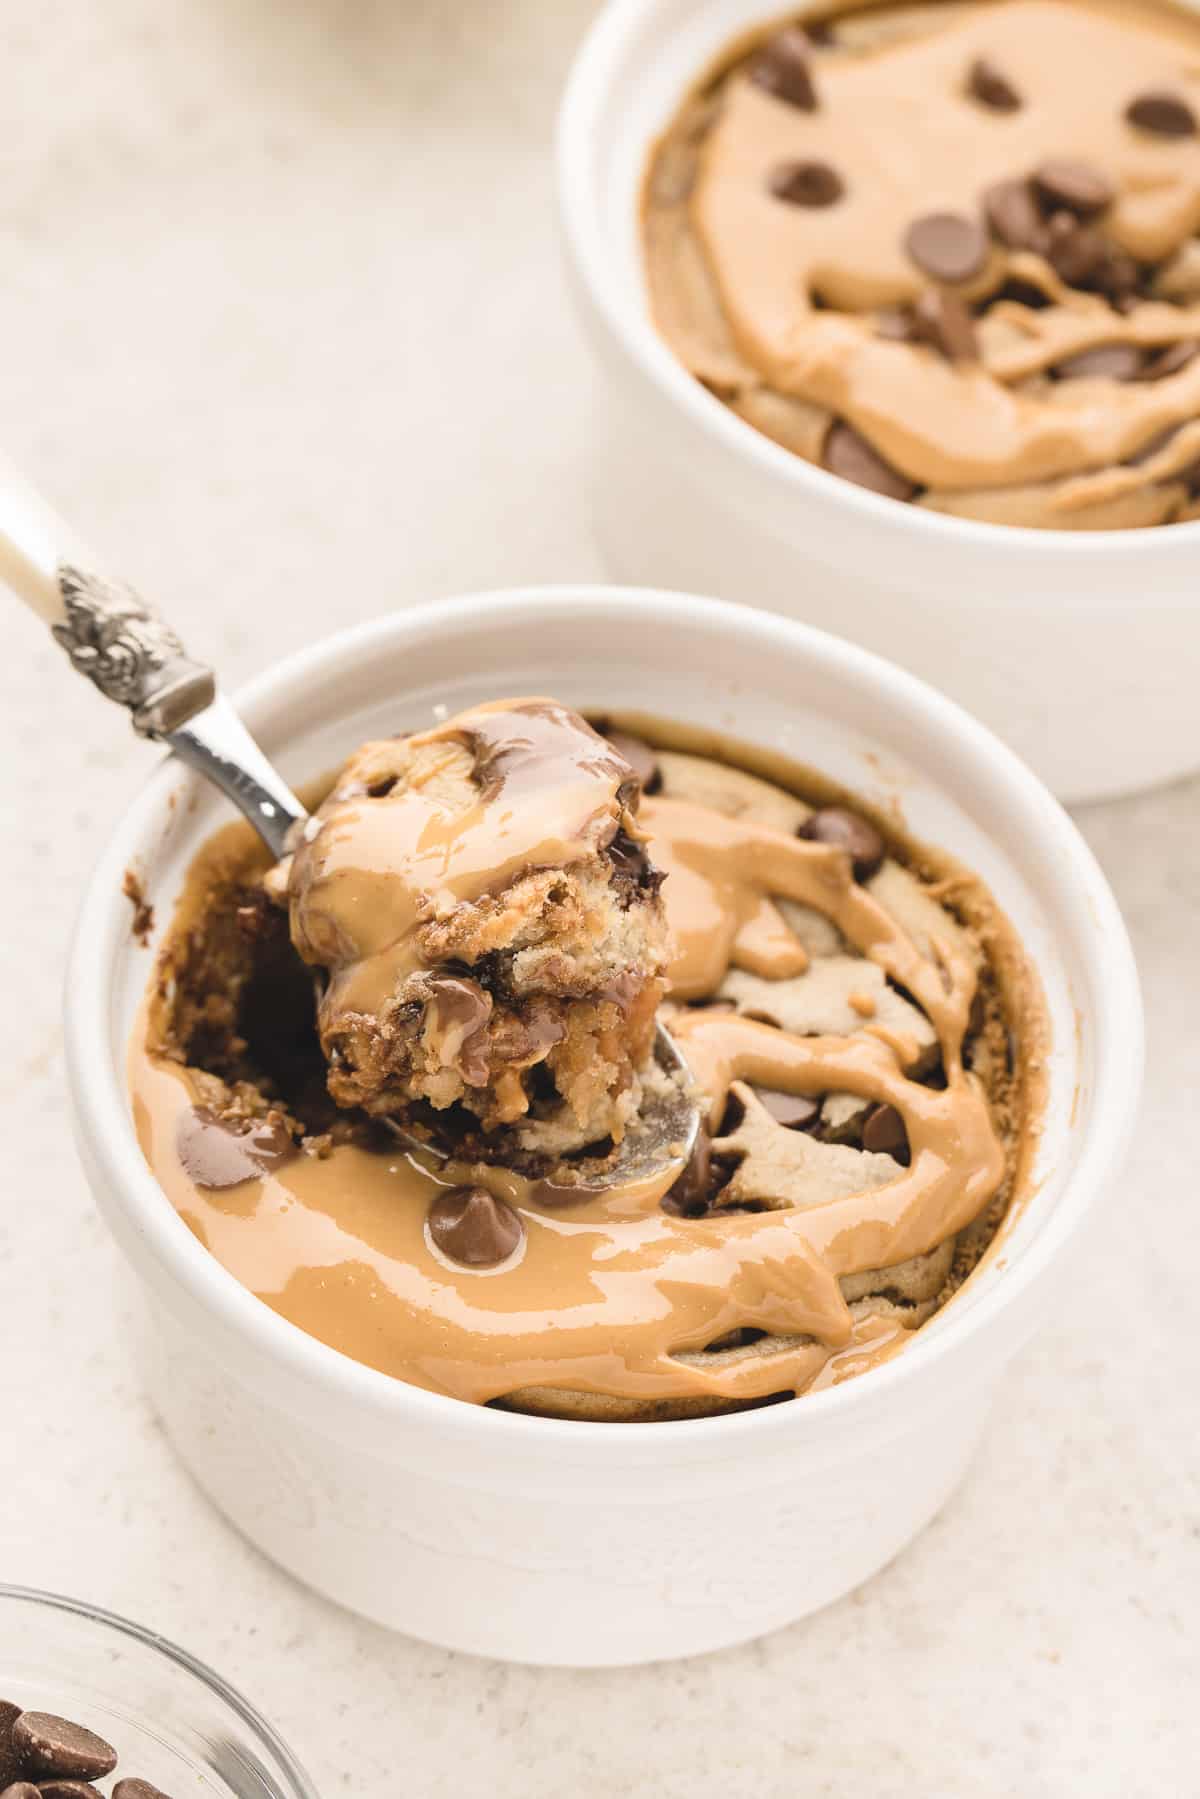 A spoonful of peanut butter chocolate blended baked oats being lifted up from a ramekin with a second ramekin in the background.